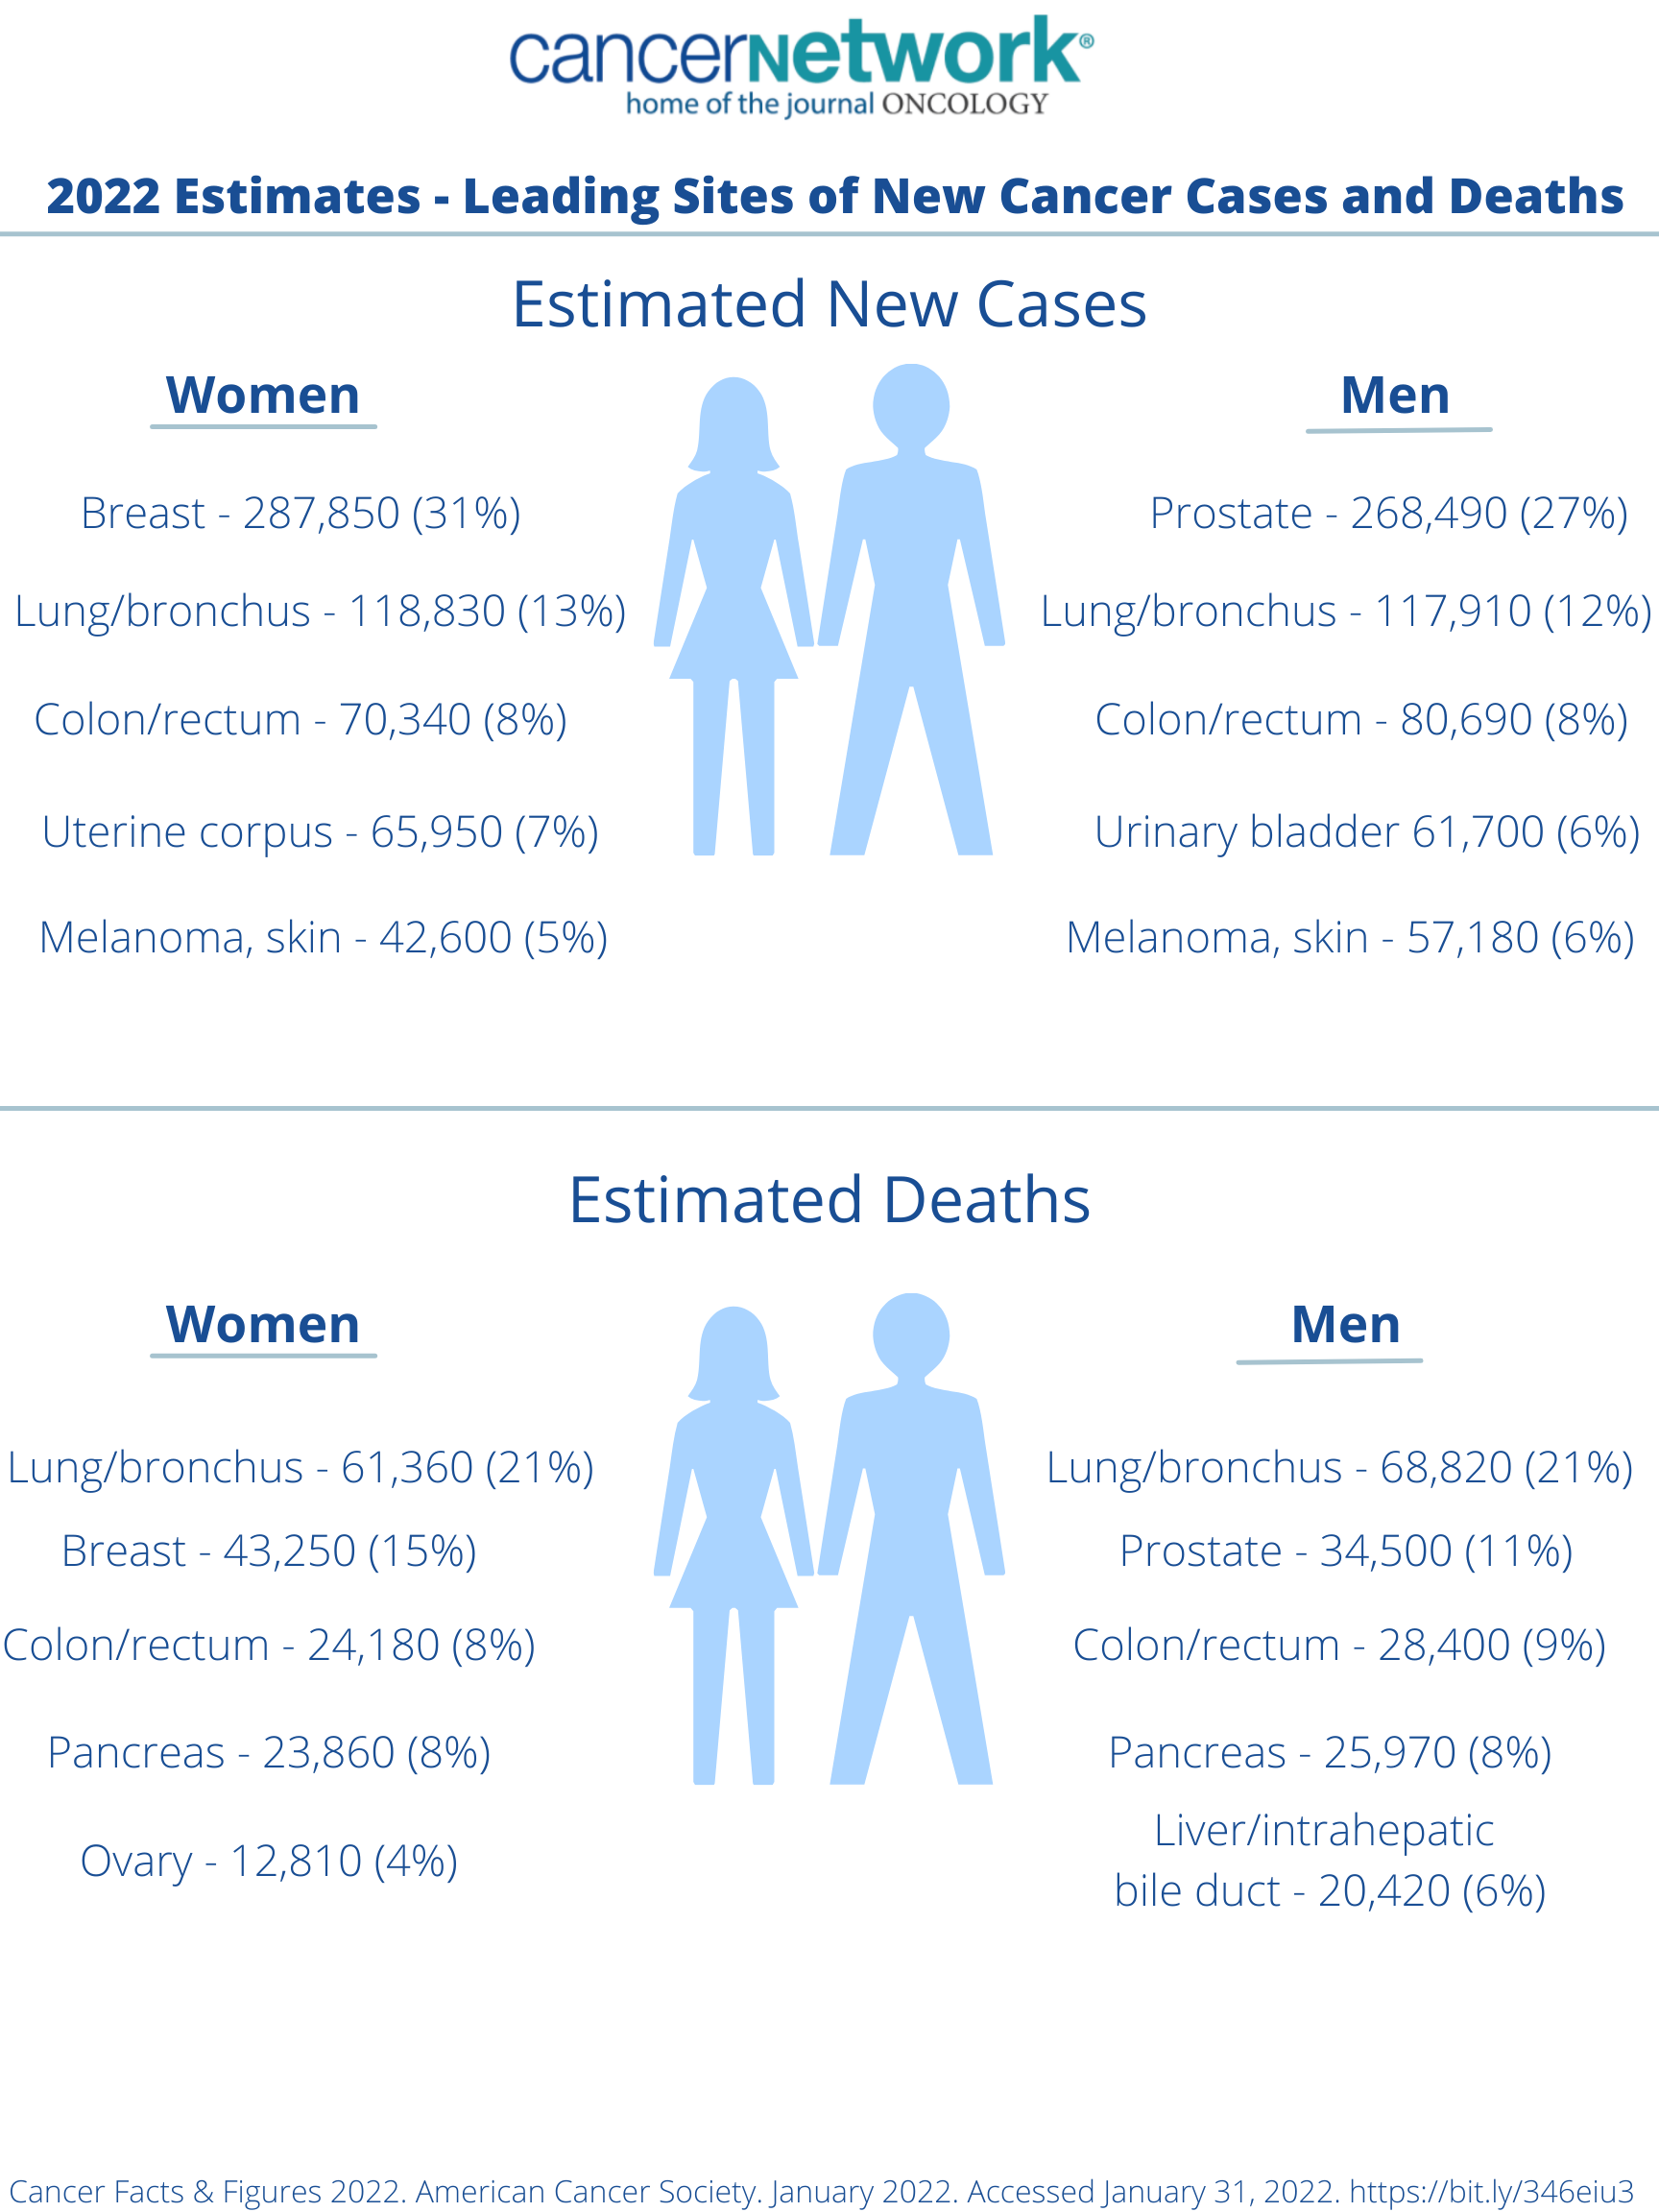 2022 estimates in leading sites of new cancer cases and deaths.